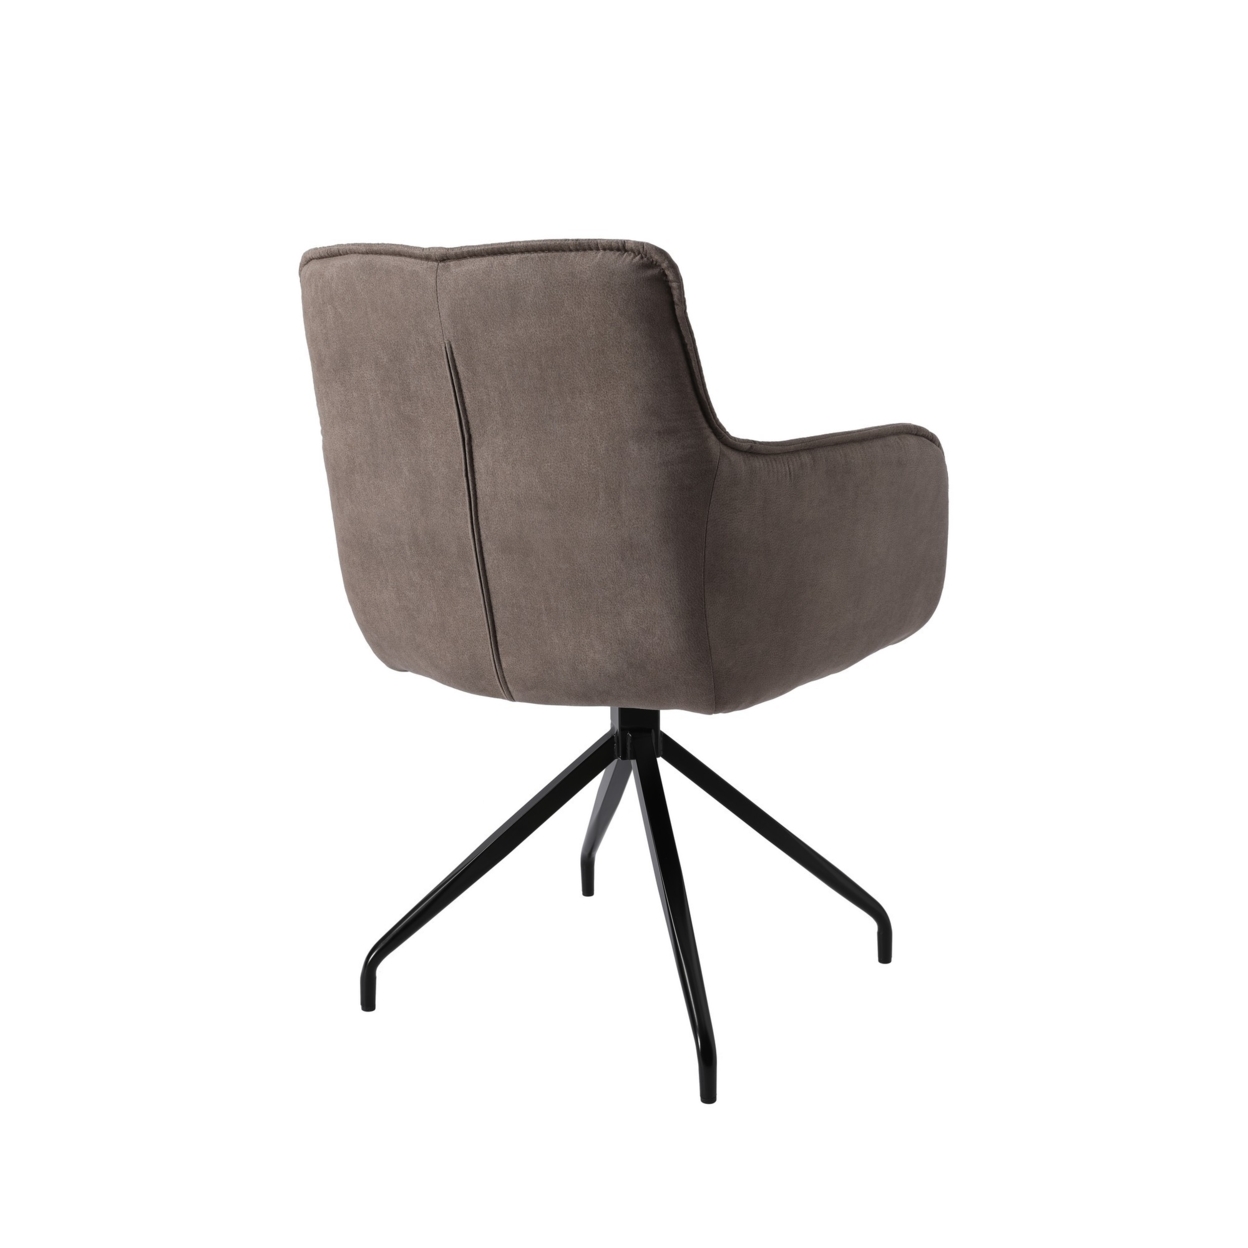 Arm Chair With Fabric Swivel Seat And Metal Claw Feet, Brown - Saltoro Sherpi